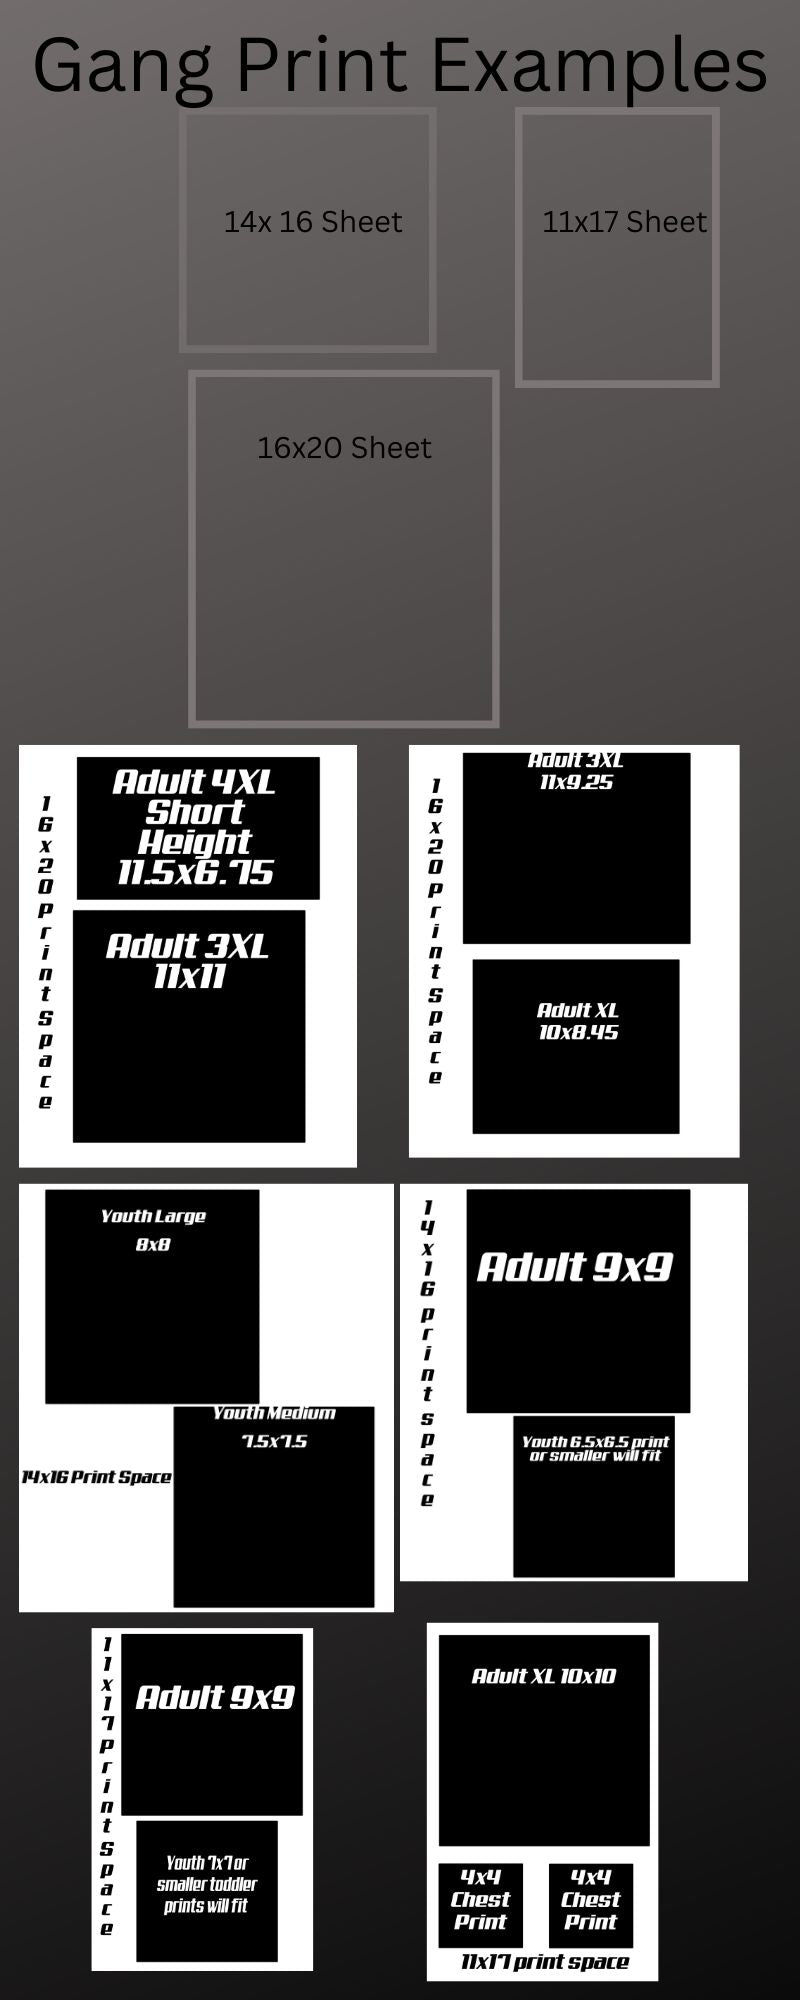 DTF Gang Print and Sheet Size Examples